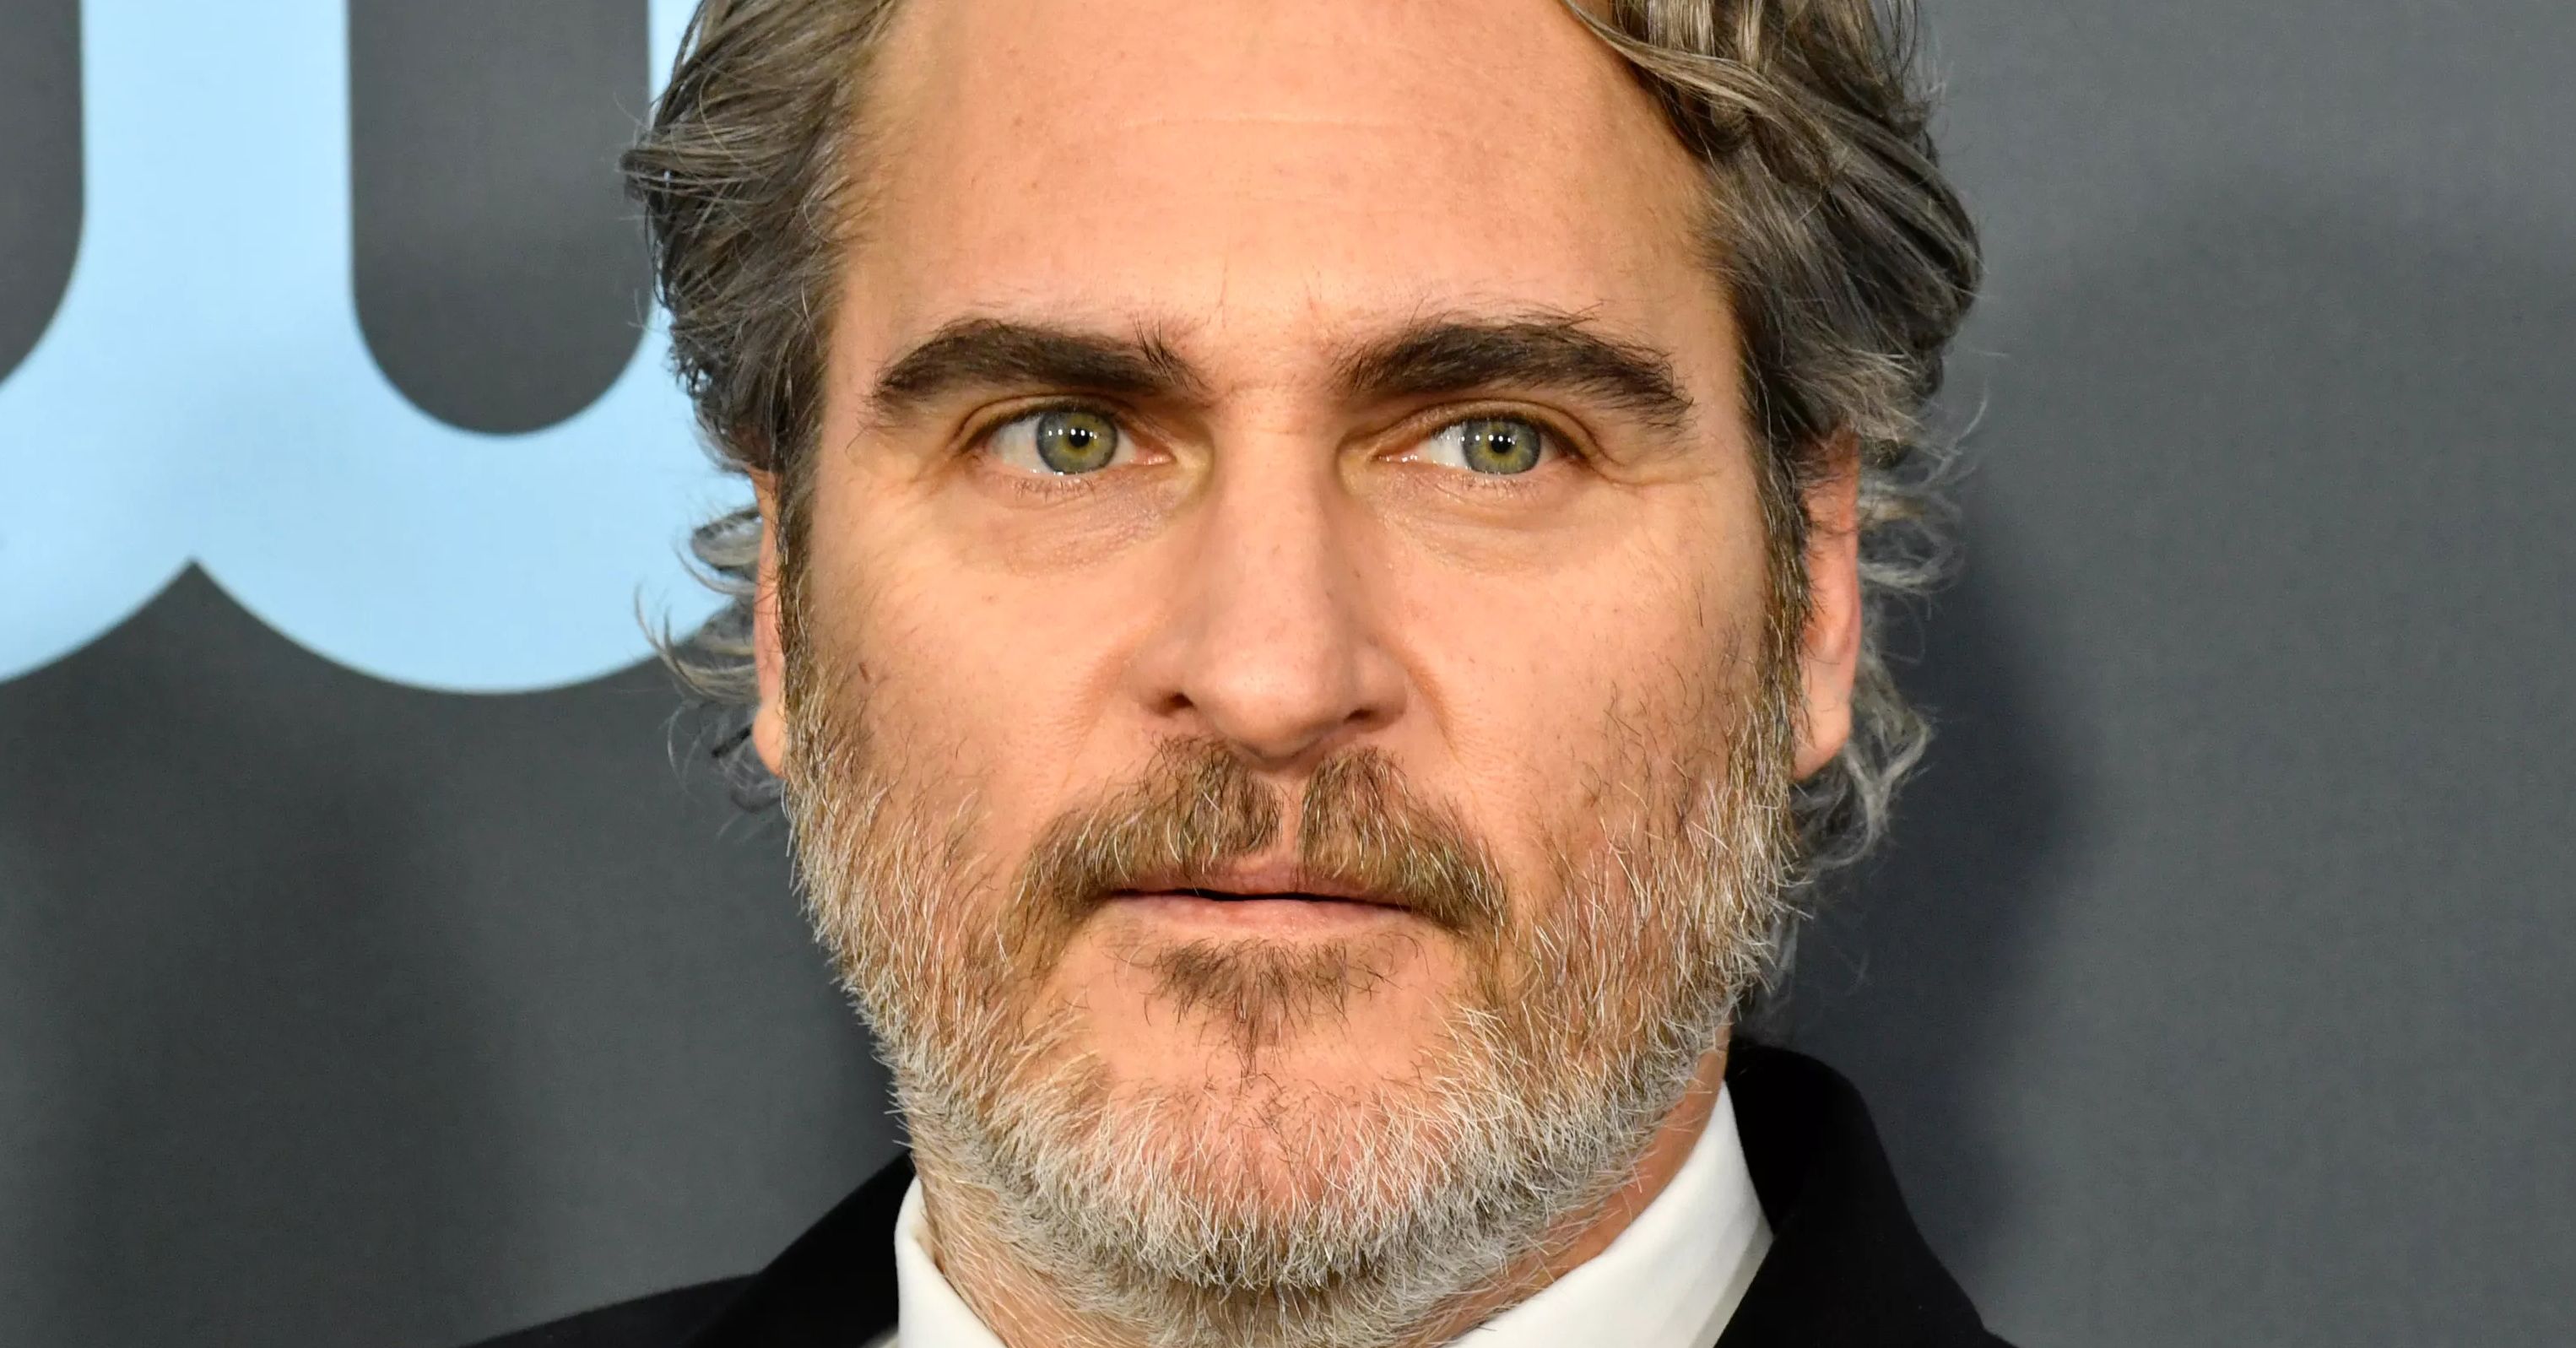 Joaquin Phoenix Calls Out 'Systemic Racism' During BAFTA Award Acceptance Speech3052 x 1597